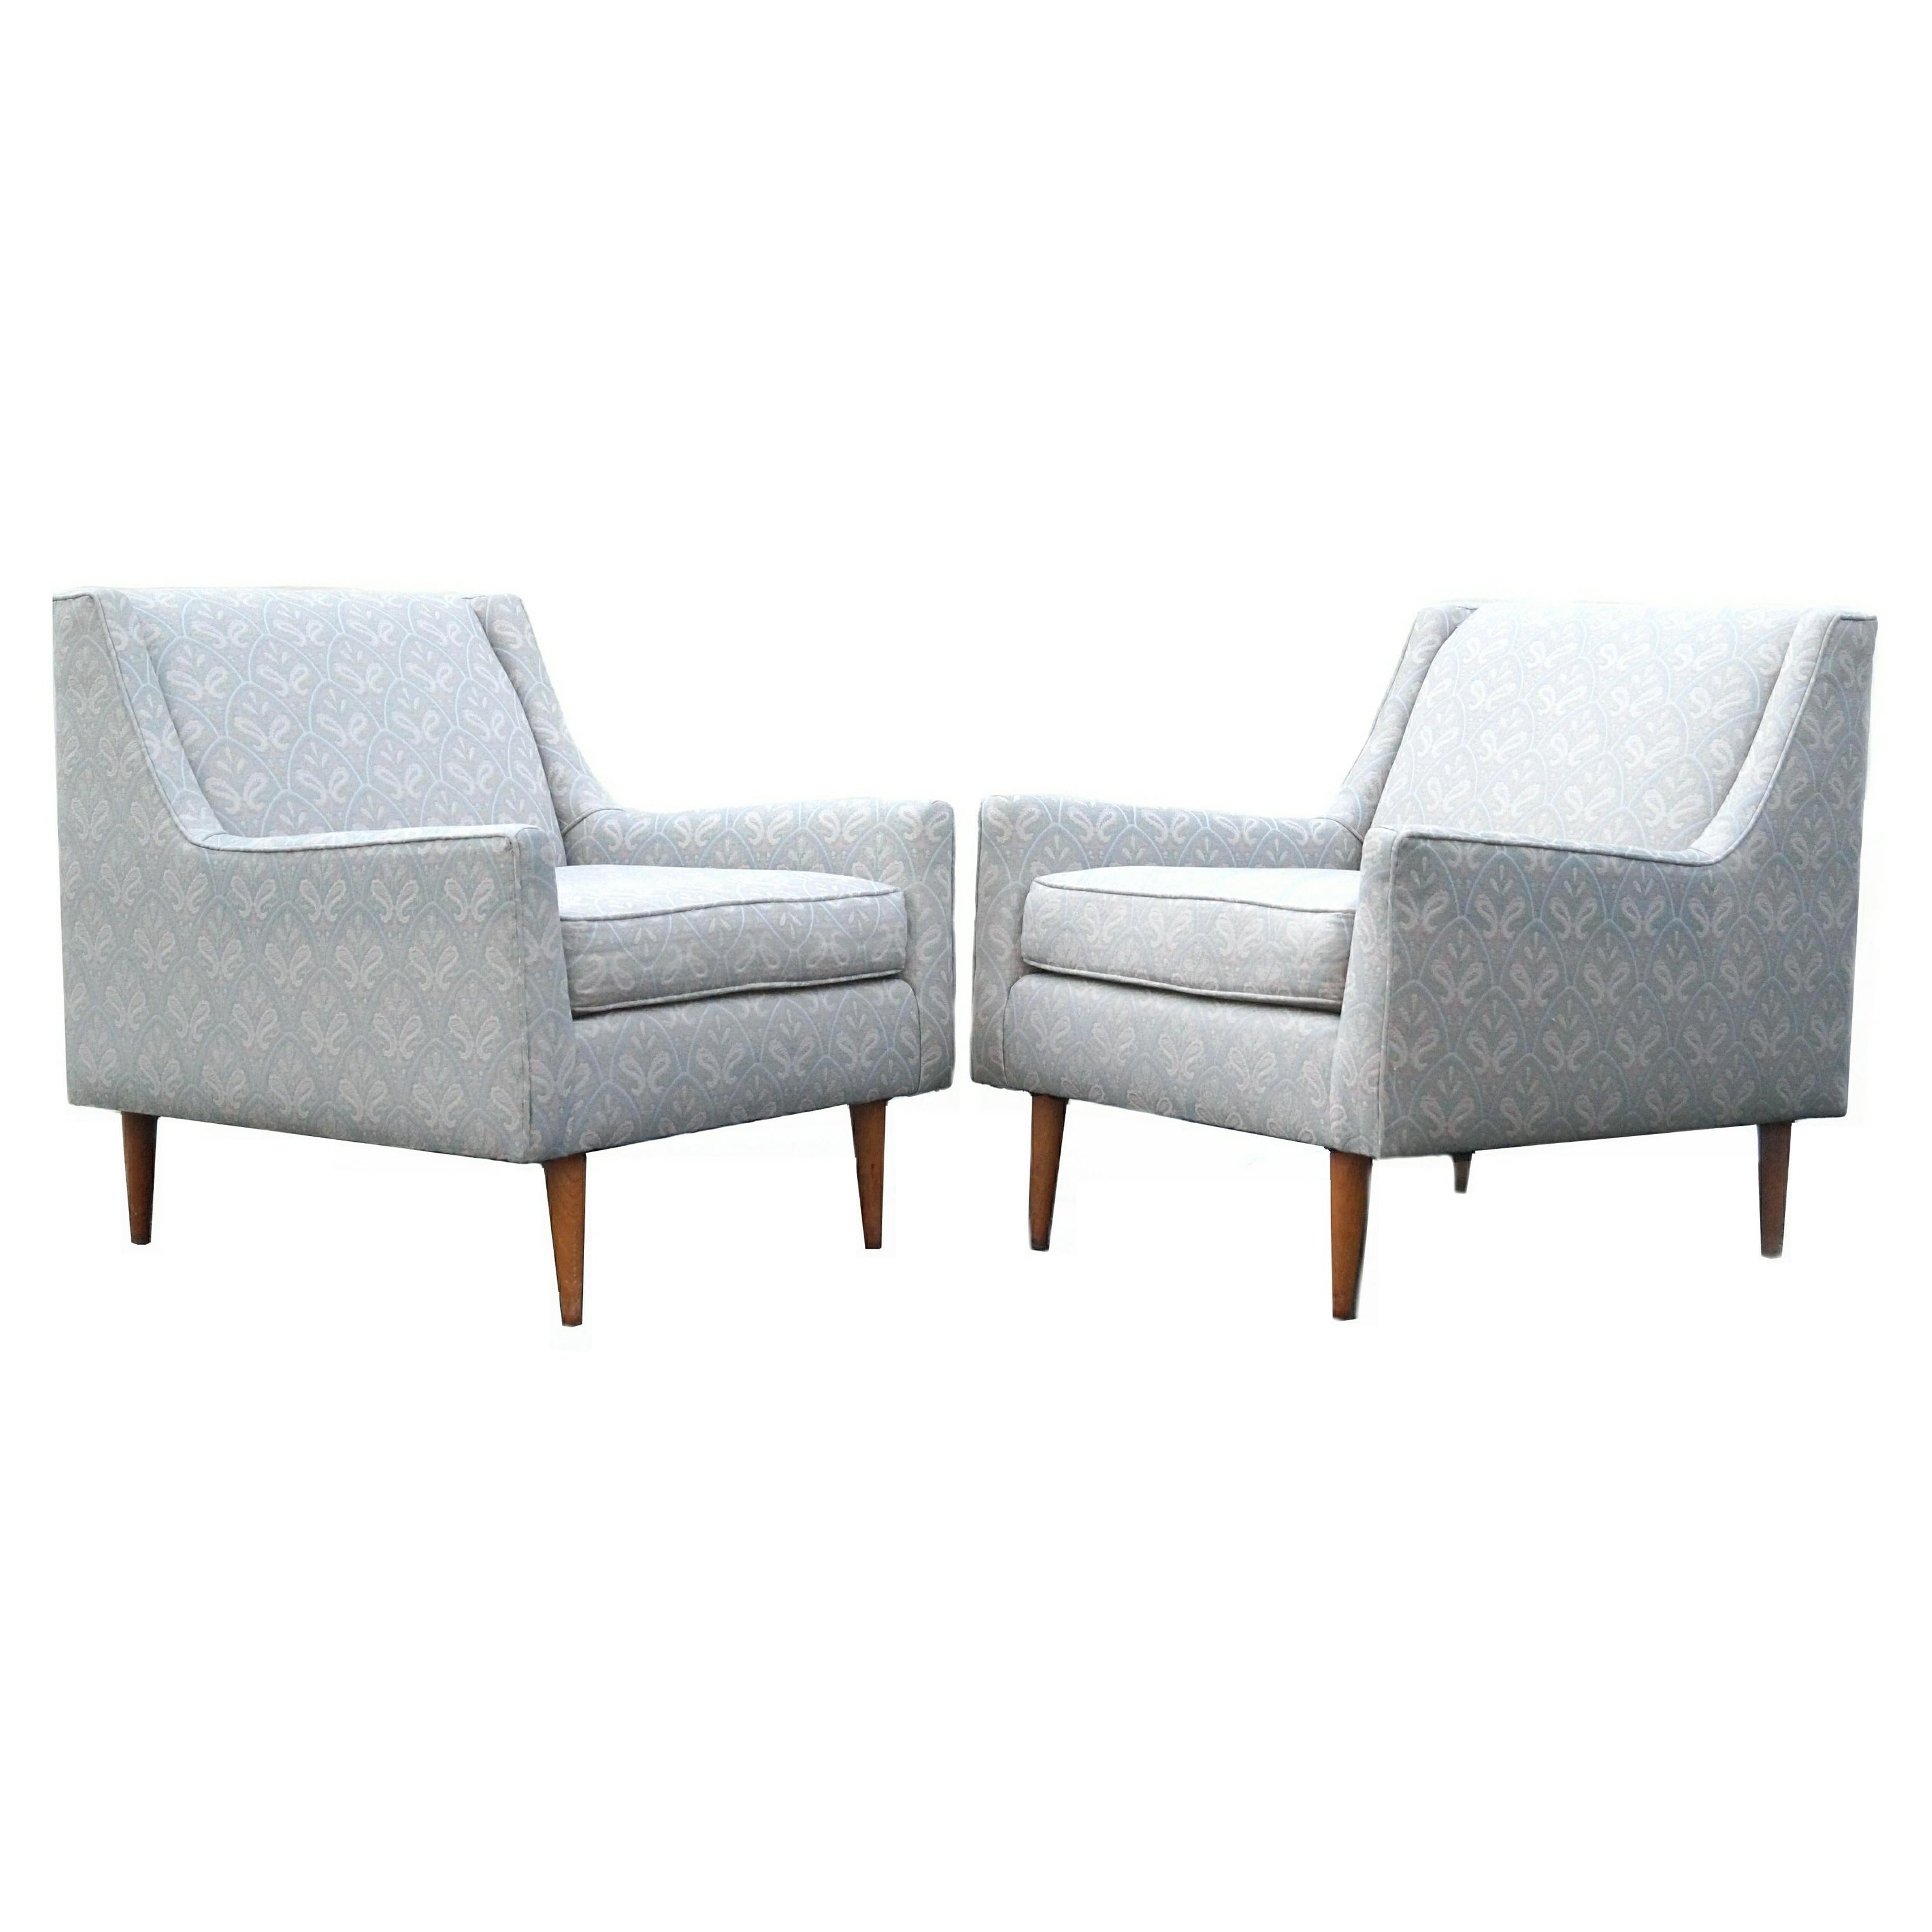 Pair of Aerodynamic 1950's Mid-Century Modern Club Chairs Edward Wormley Style For Sale